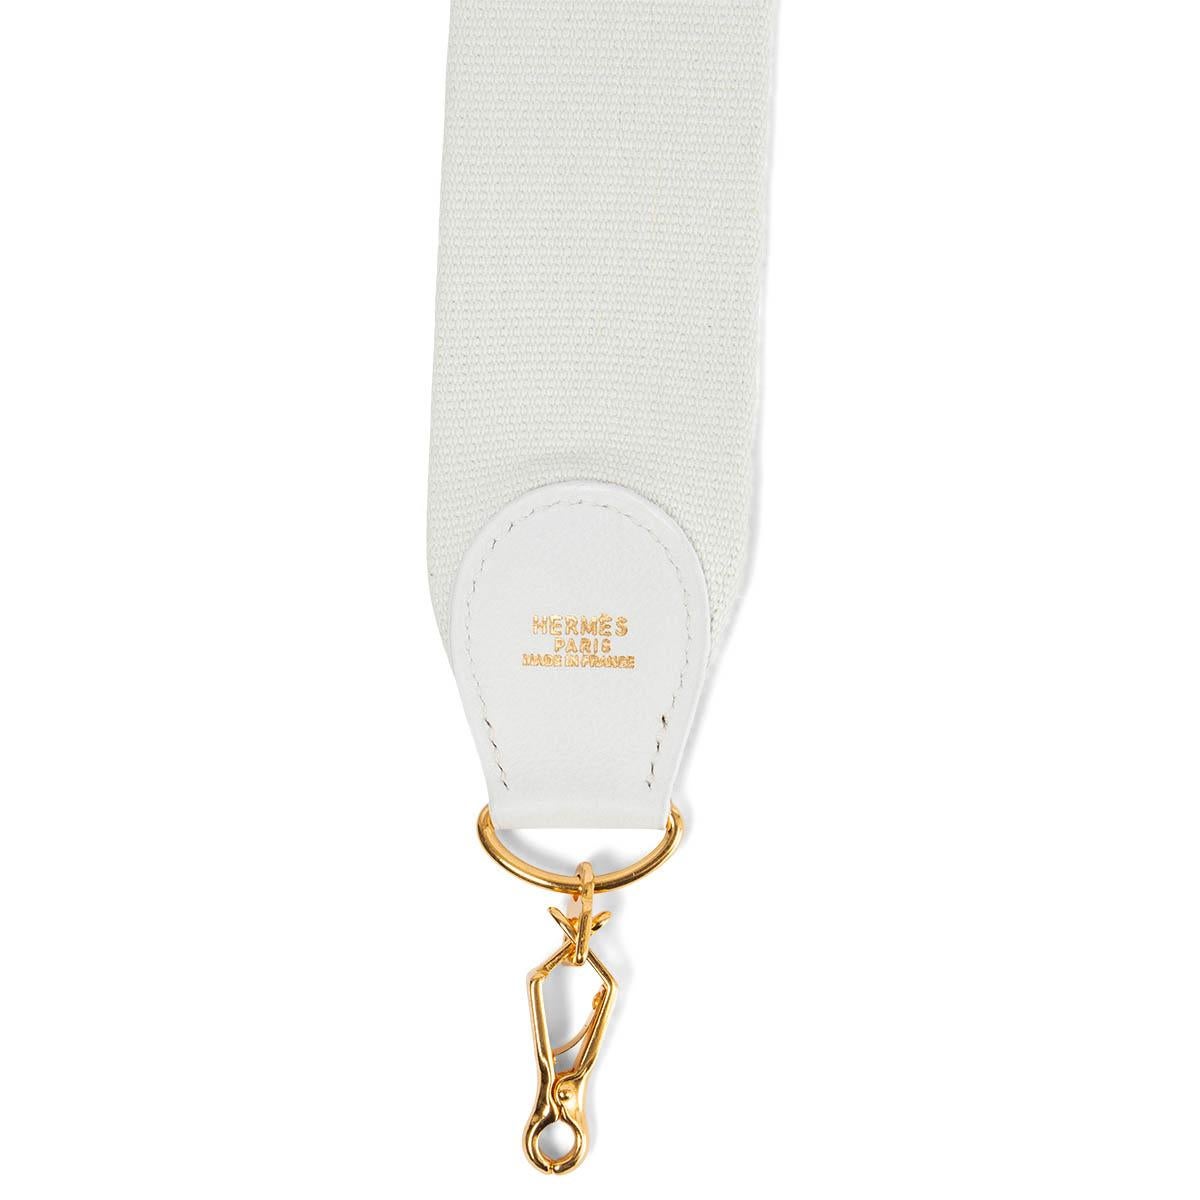 100% authentic Hermès shoulder strap for your Kelly or Evelyne bag in Blanc white canvas and Gulliver leather. Has been carried and is in excellent condition.

Measurements
Width	5cm (2in)
Length	110cm (42.9in)
Hardware	Gold-Tone

All our listings